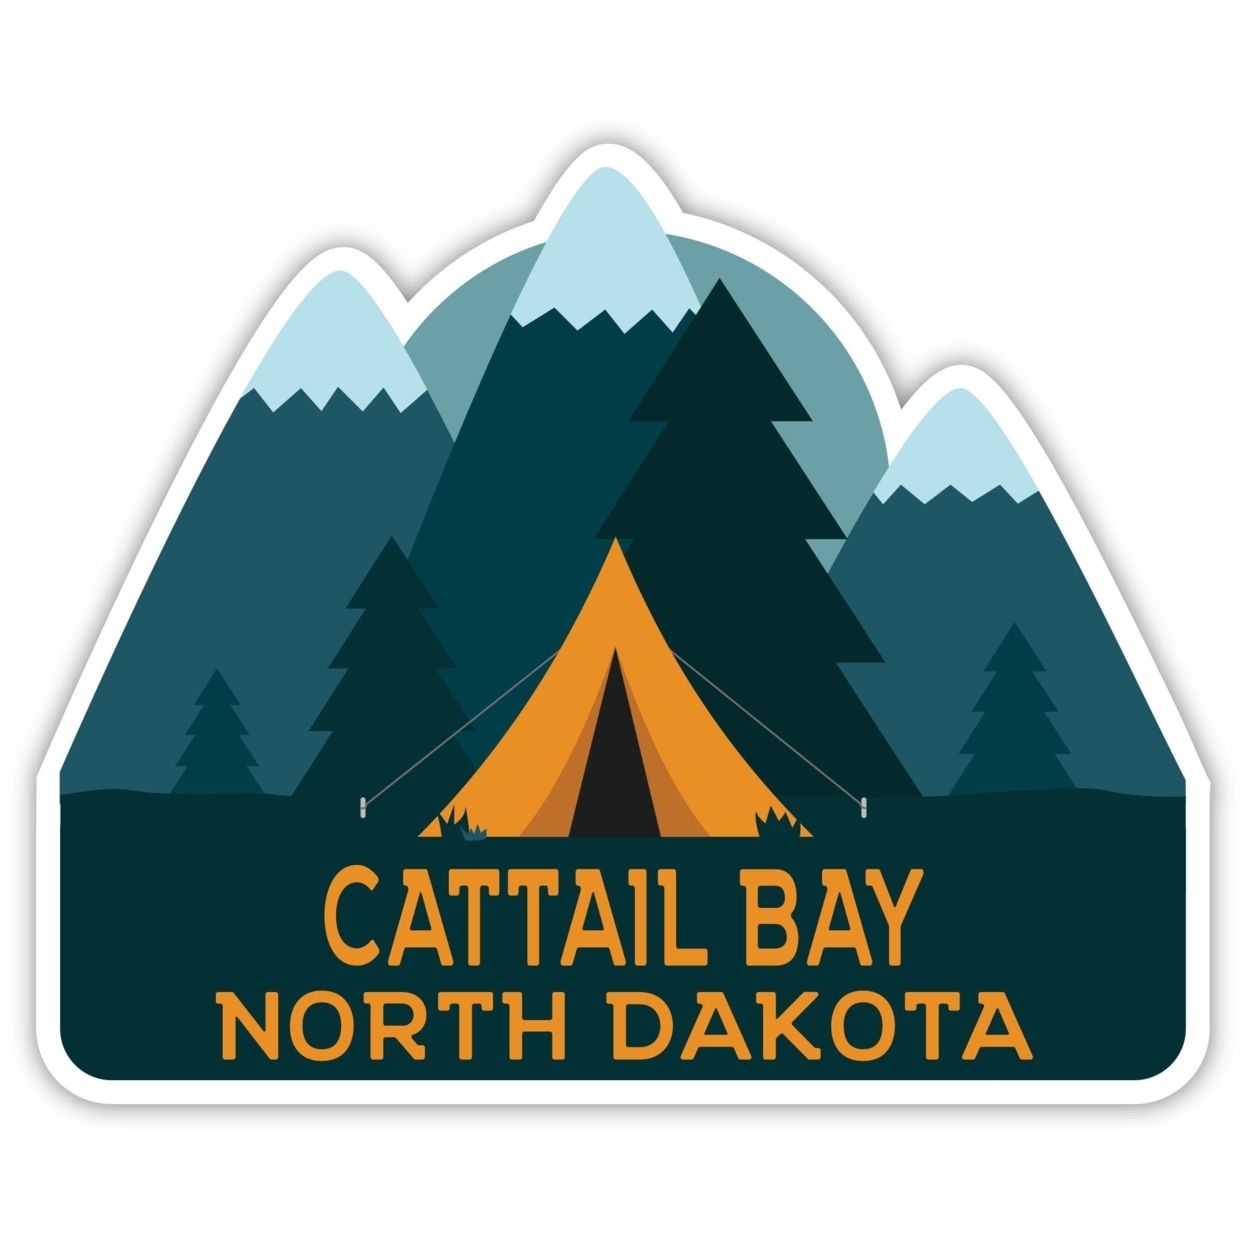 Cattail Bay North Dakota Souvenir Decorative Stickers (Choose Theme And Size) - 4-Pack, 2-Inch, Tent